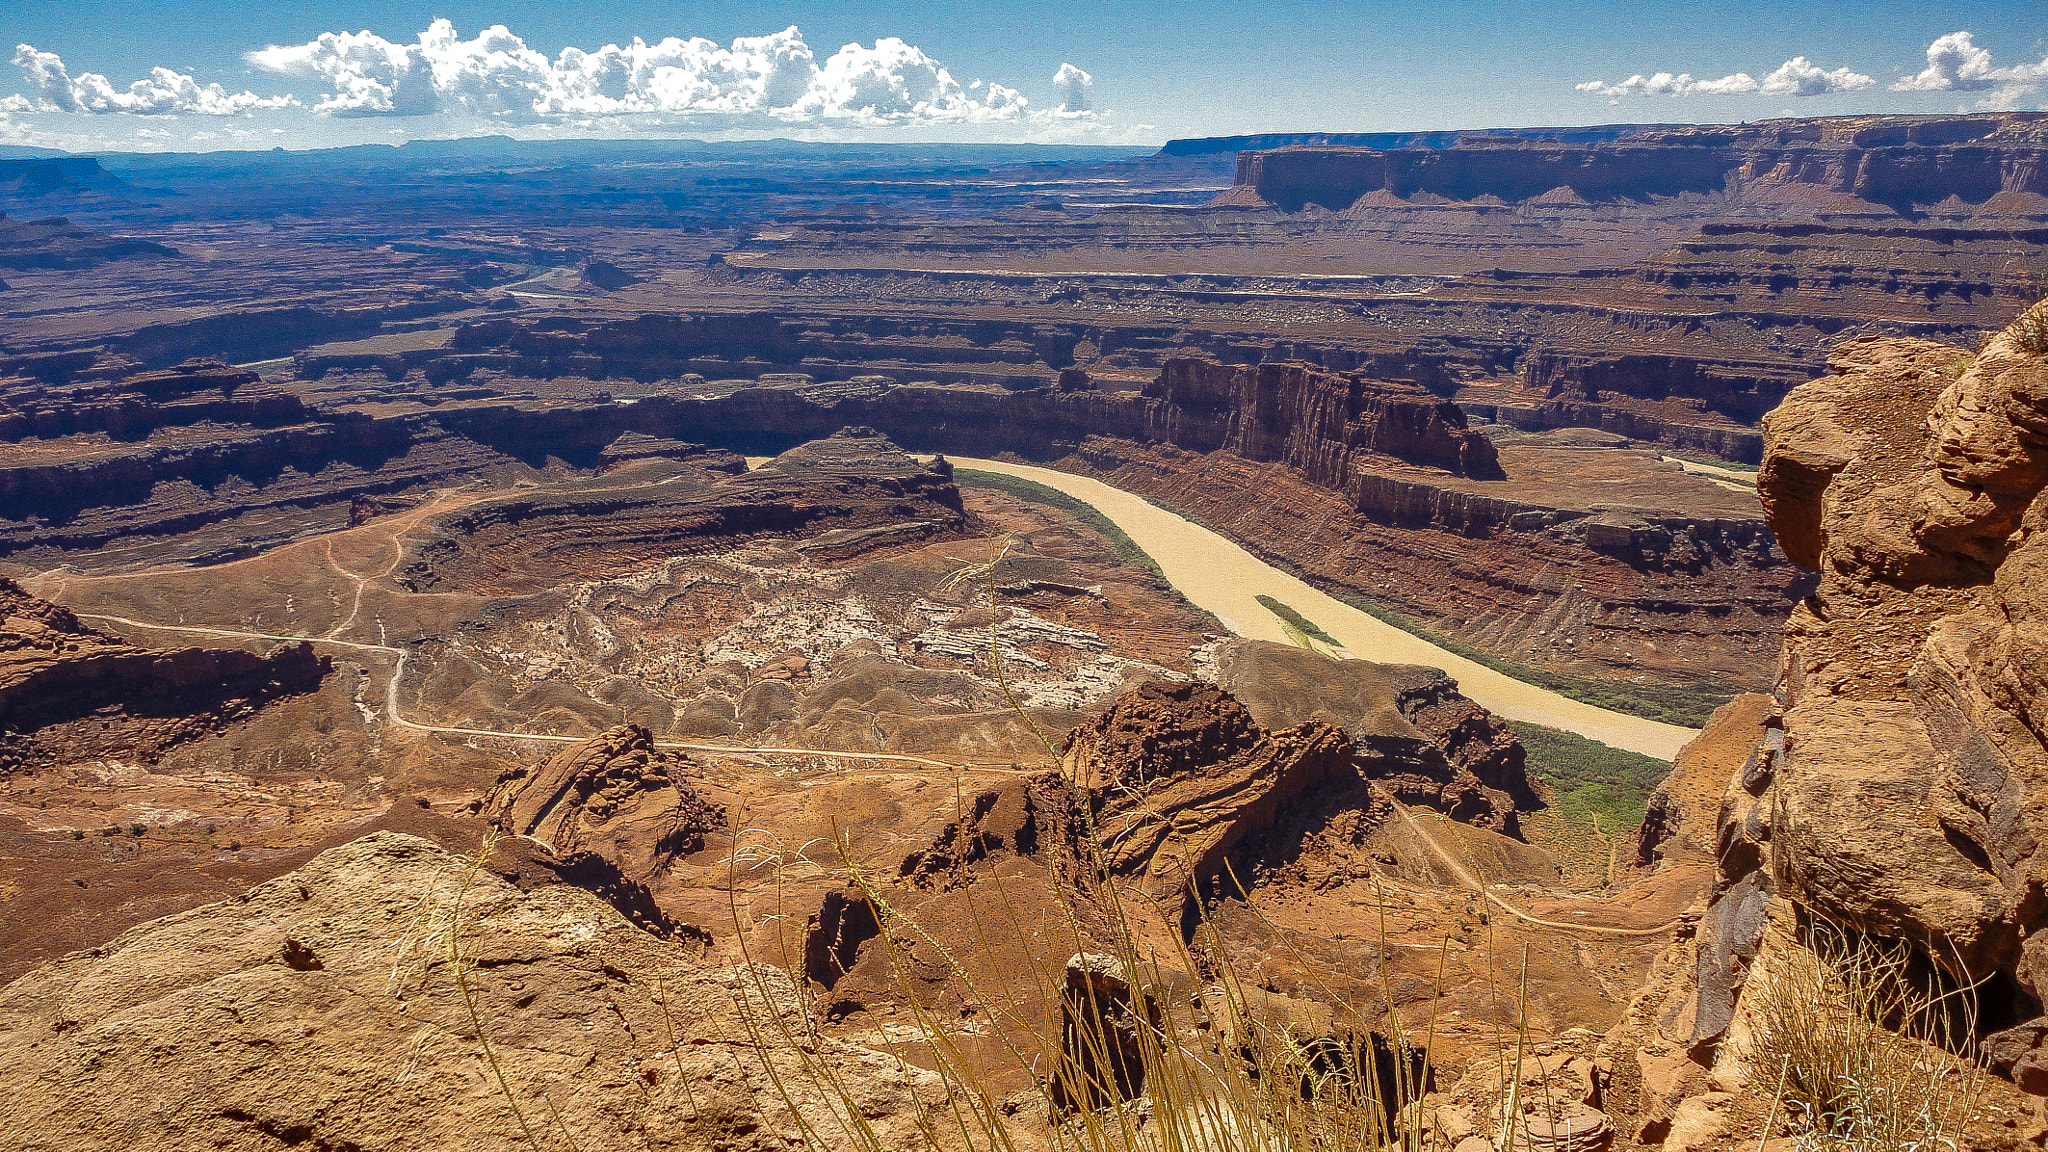 Sony Cyber-shot DSC-W350 sample photo. The colorado river at dead horse point photography